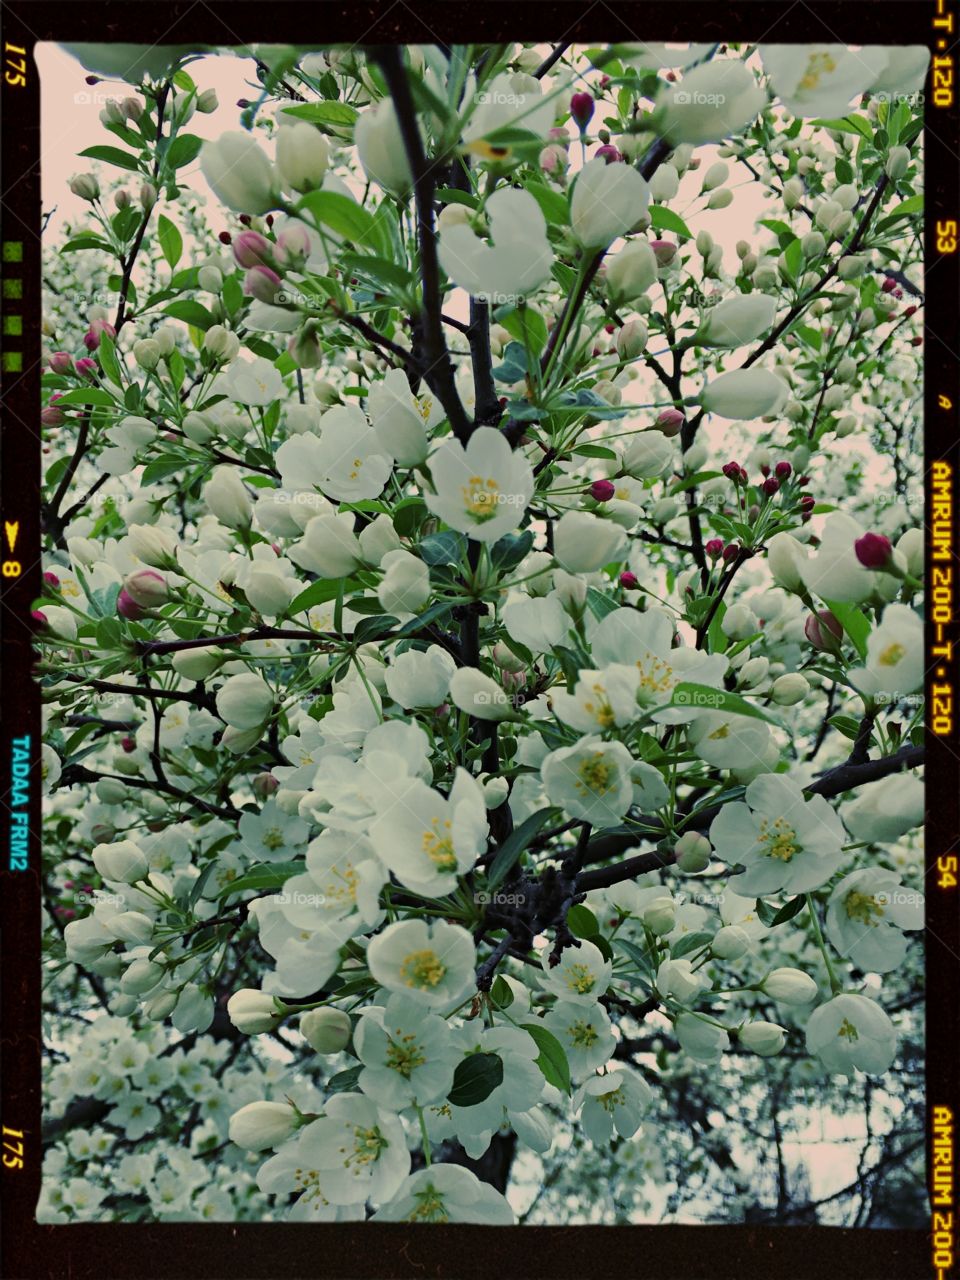 Crab apple tree flower bloom in spring in Cleveland 